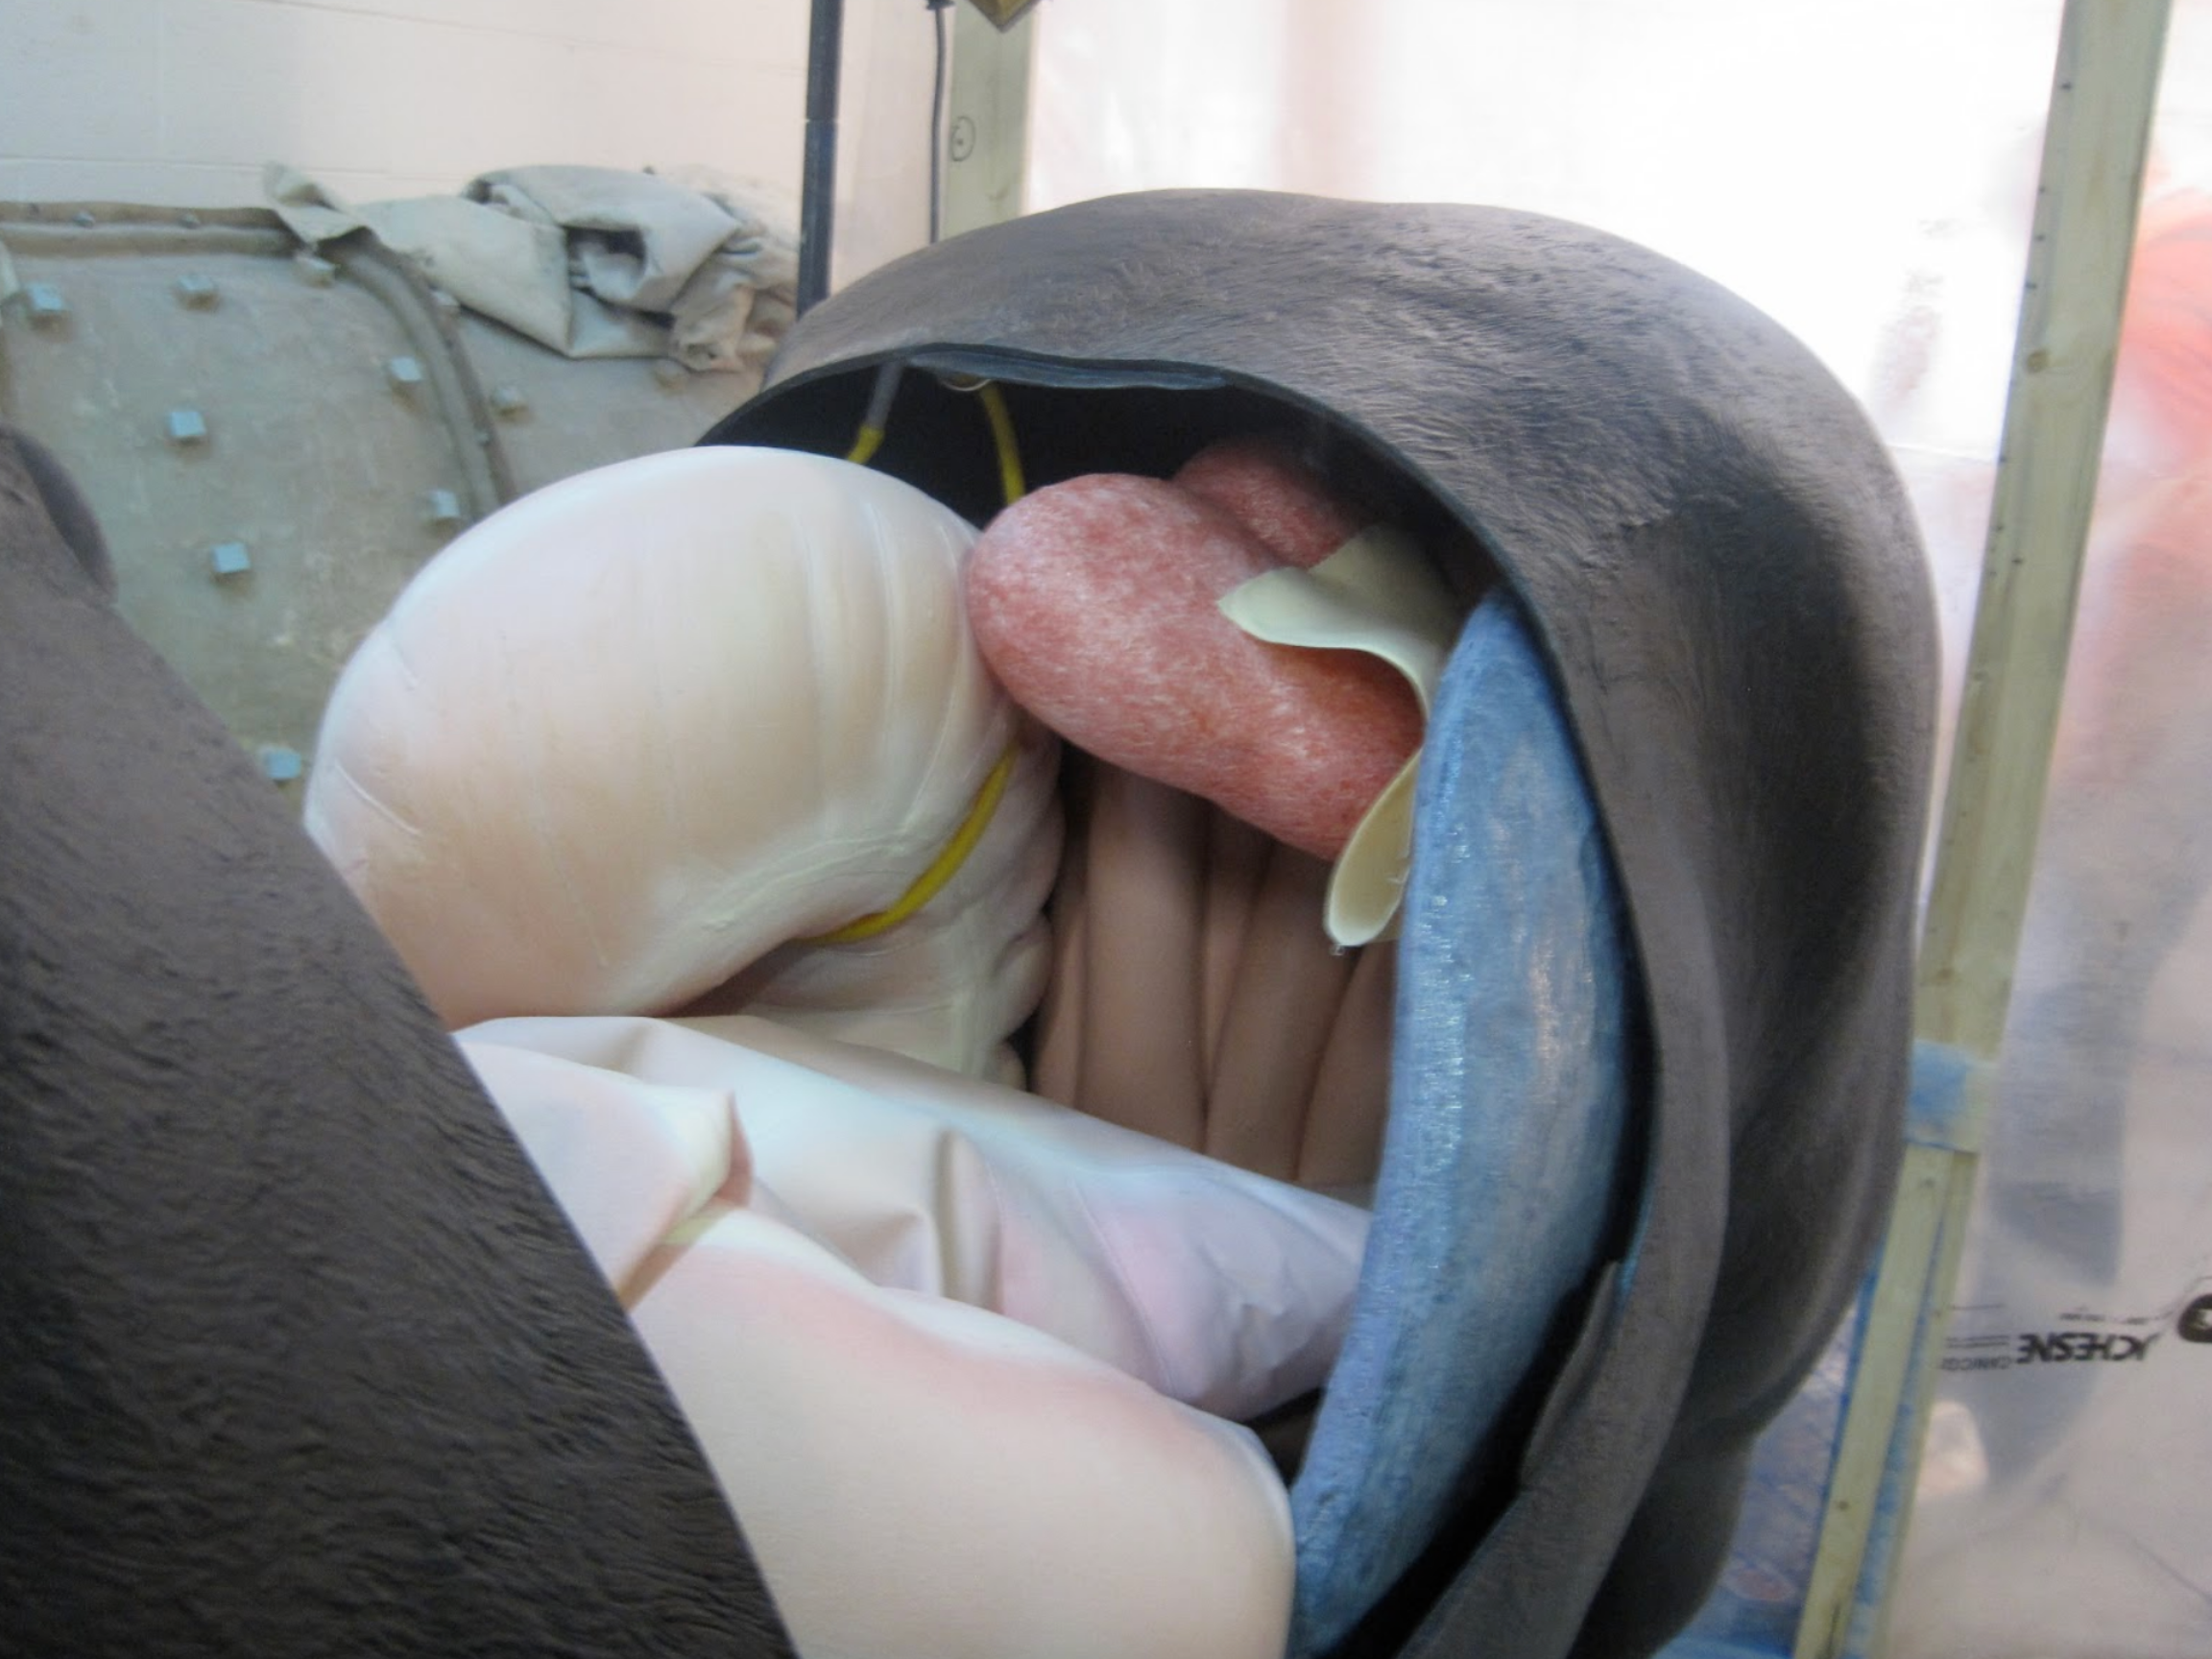  &nbsp;Here we can see the GI tract, small intestine, spleen and kidney   This photo shows the inflatable portion of the rectum and our newly developed equine uterus with broad ligament. &nbsp;The uterus also has interchangeable ovaries for palpation